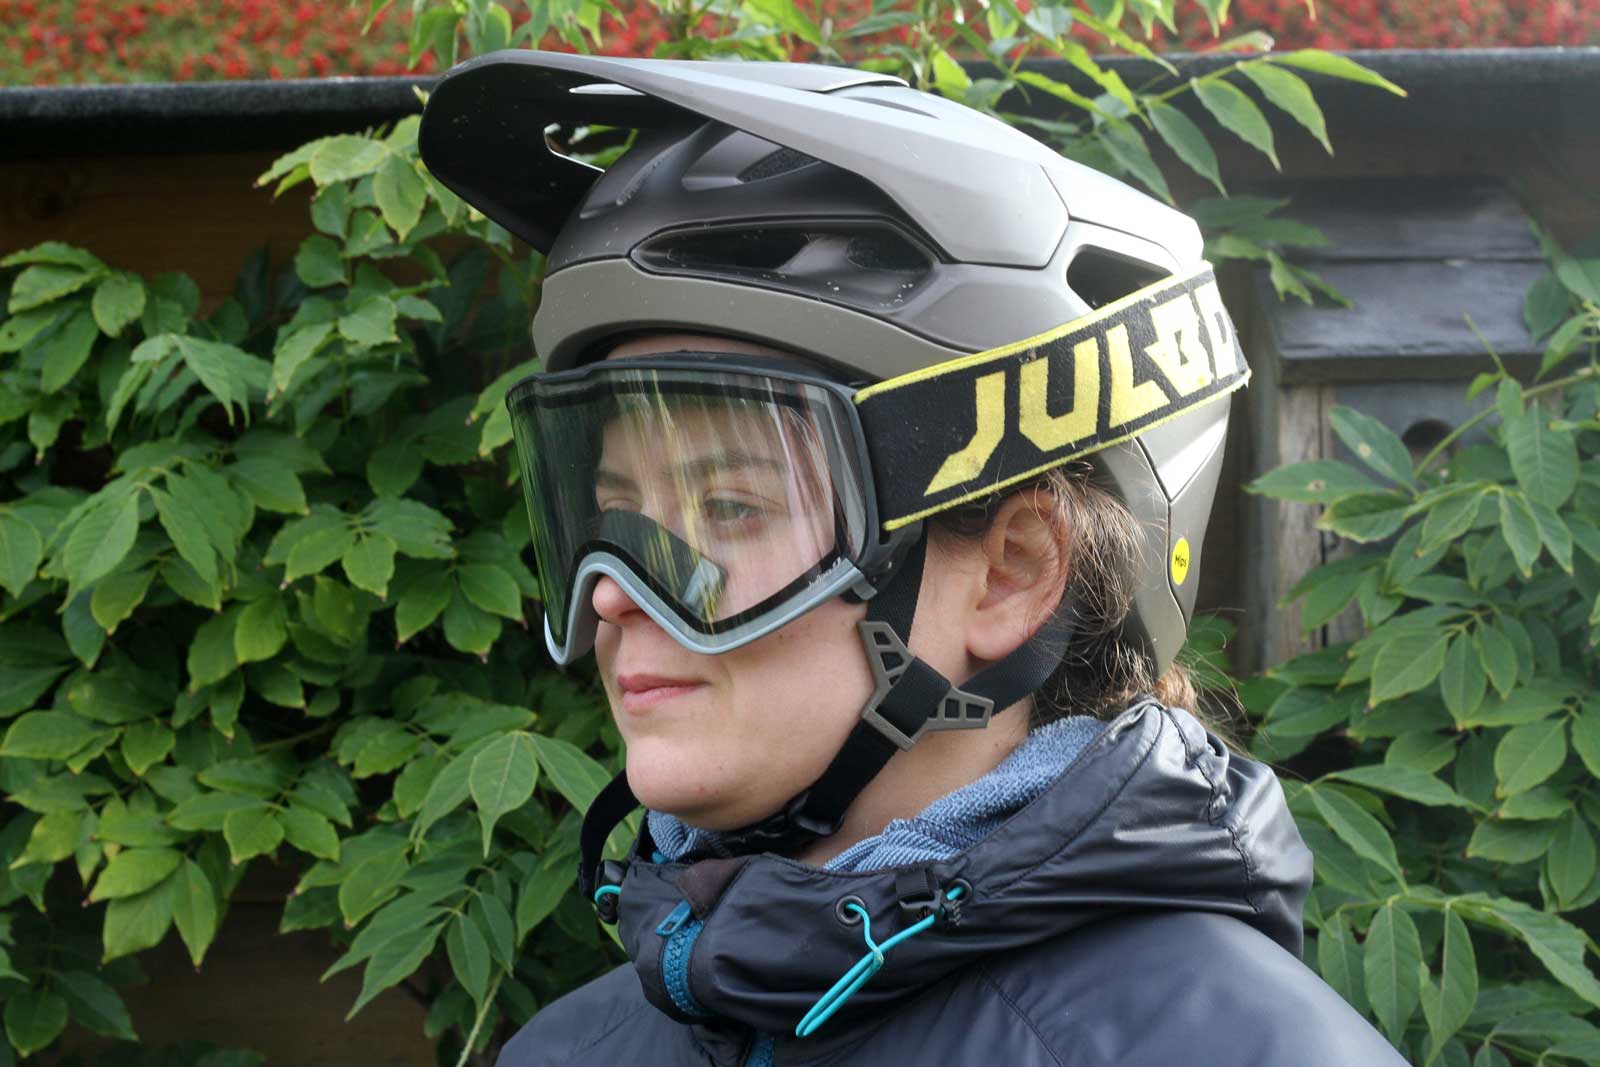 specialized tactic 4 helmet review julbo goggles on face